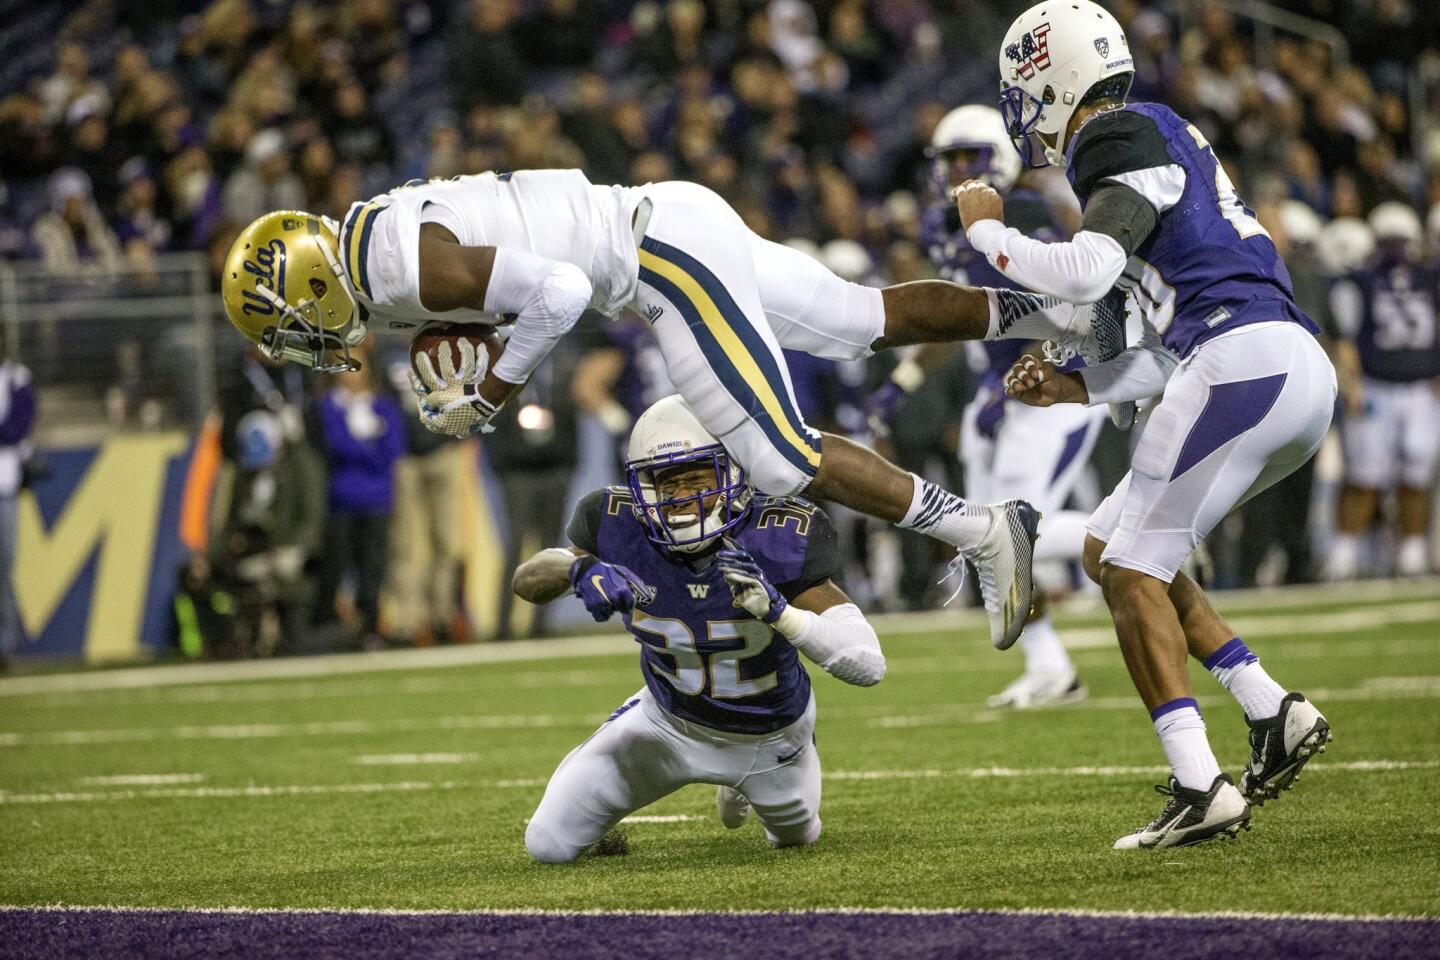 UCLA receiver Mossi Johnson flips into the end zone on a 15-yard pass play against Washington in the second half.